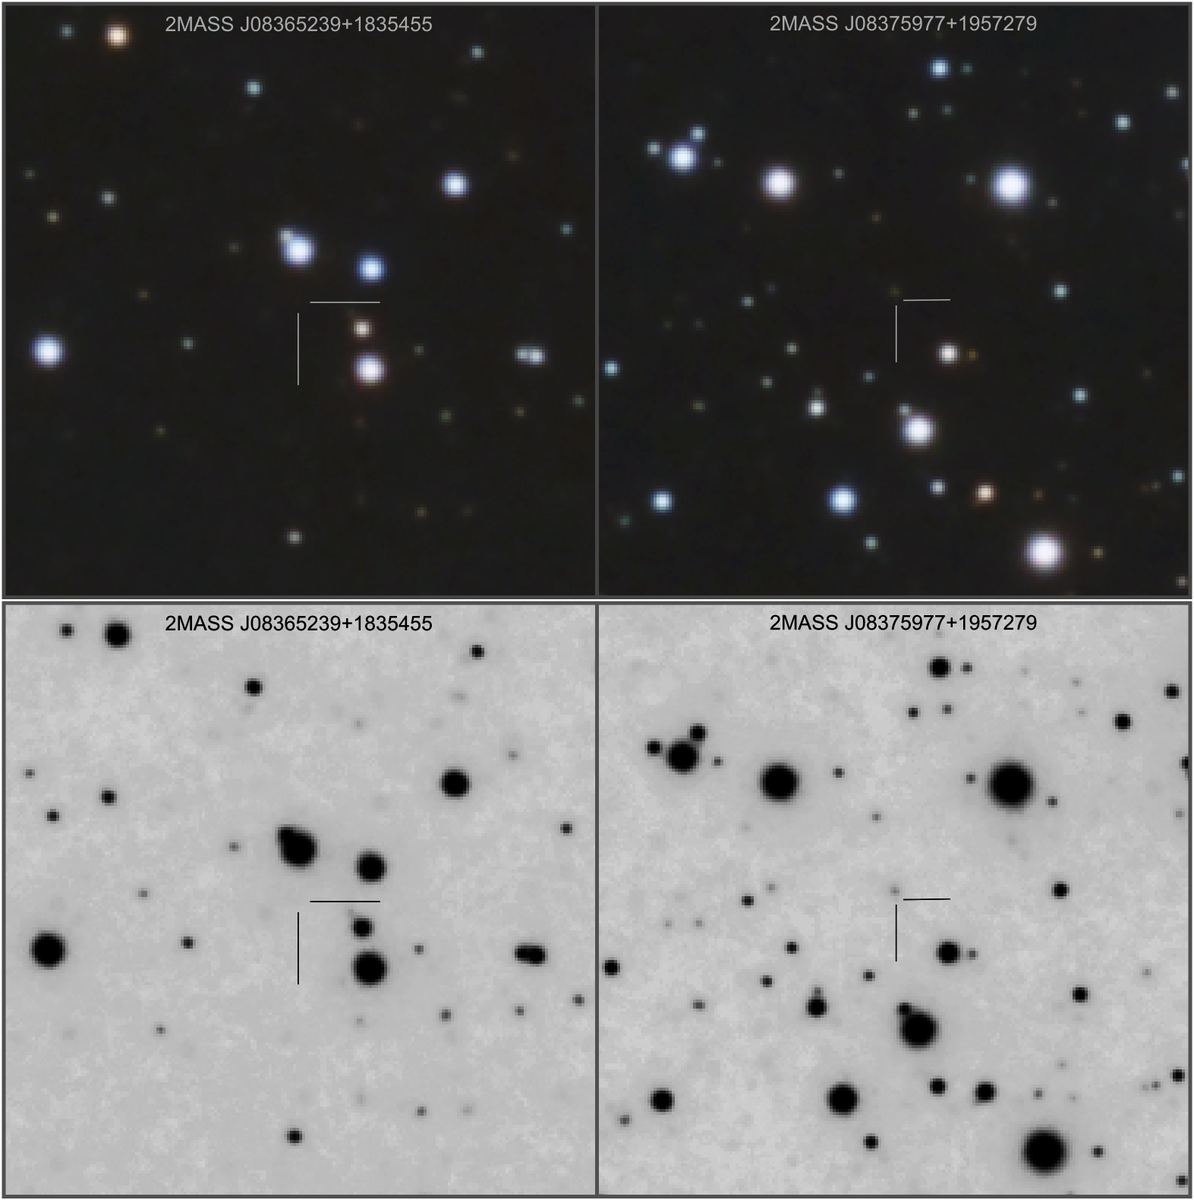 Two brown dwarfs in the Praesepe cluster (M44)
After M45, M44 is the cluster in which search for substellar objects or red dwarfs, being at 180pc.
There are very few brown dwarfs concretely confirmed. In fact I only tracked down two in my however deep capture.